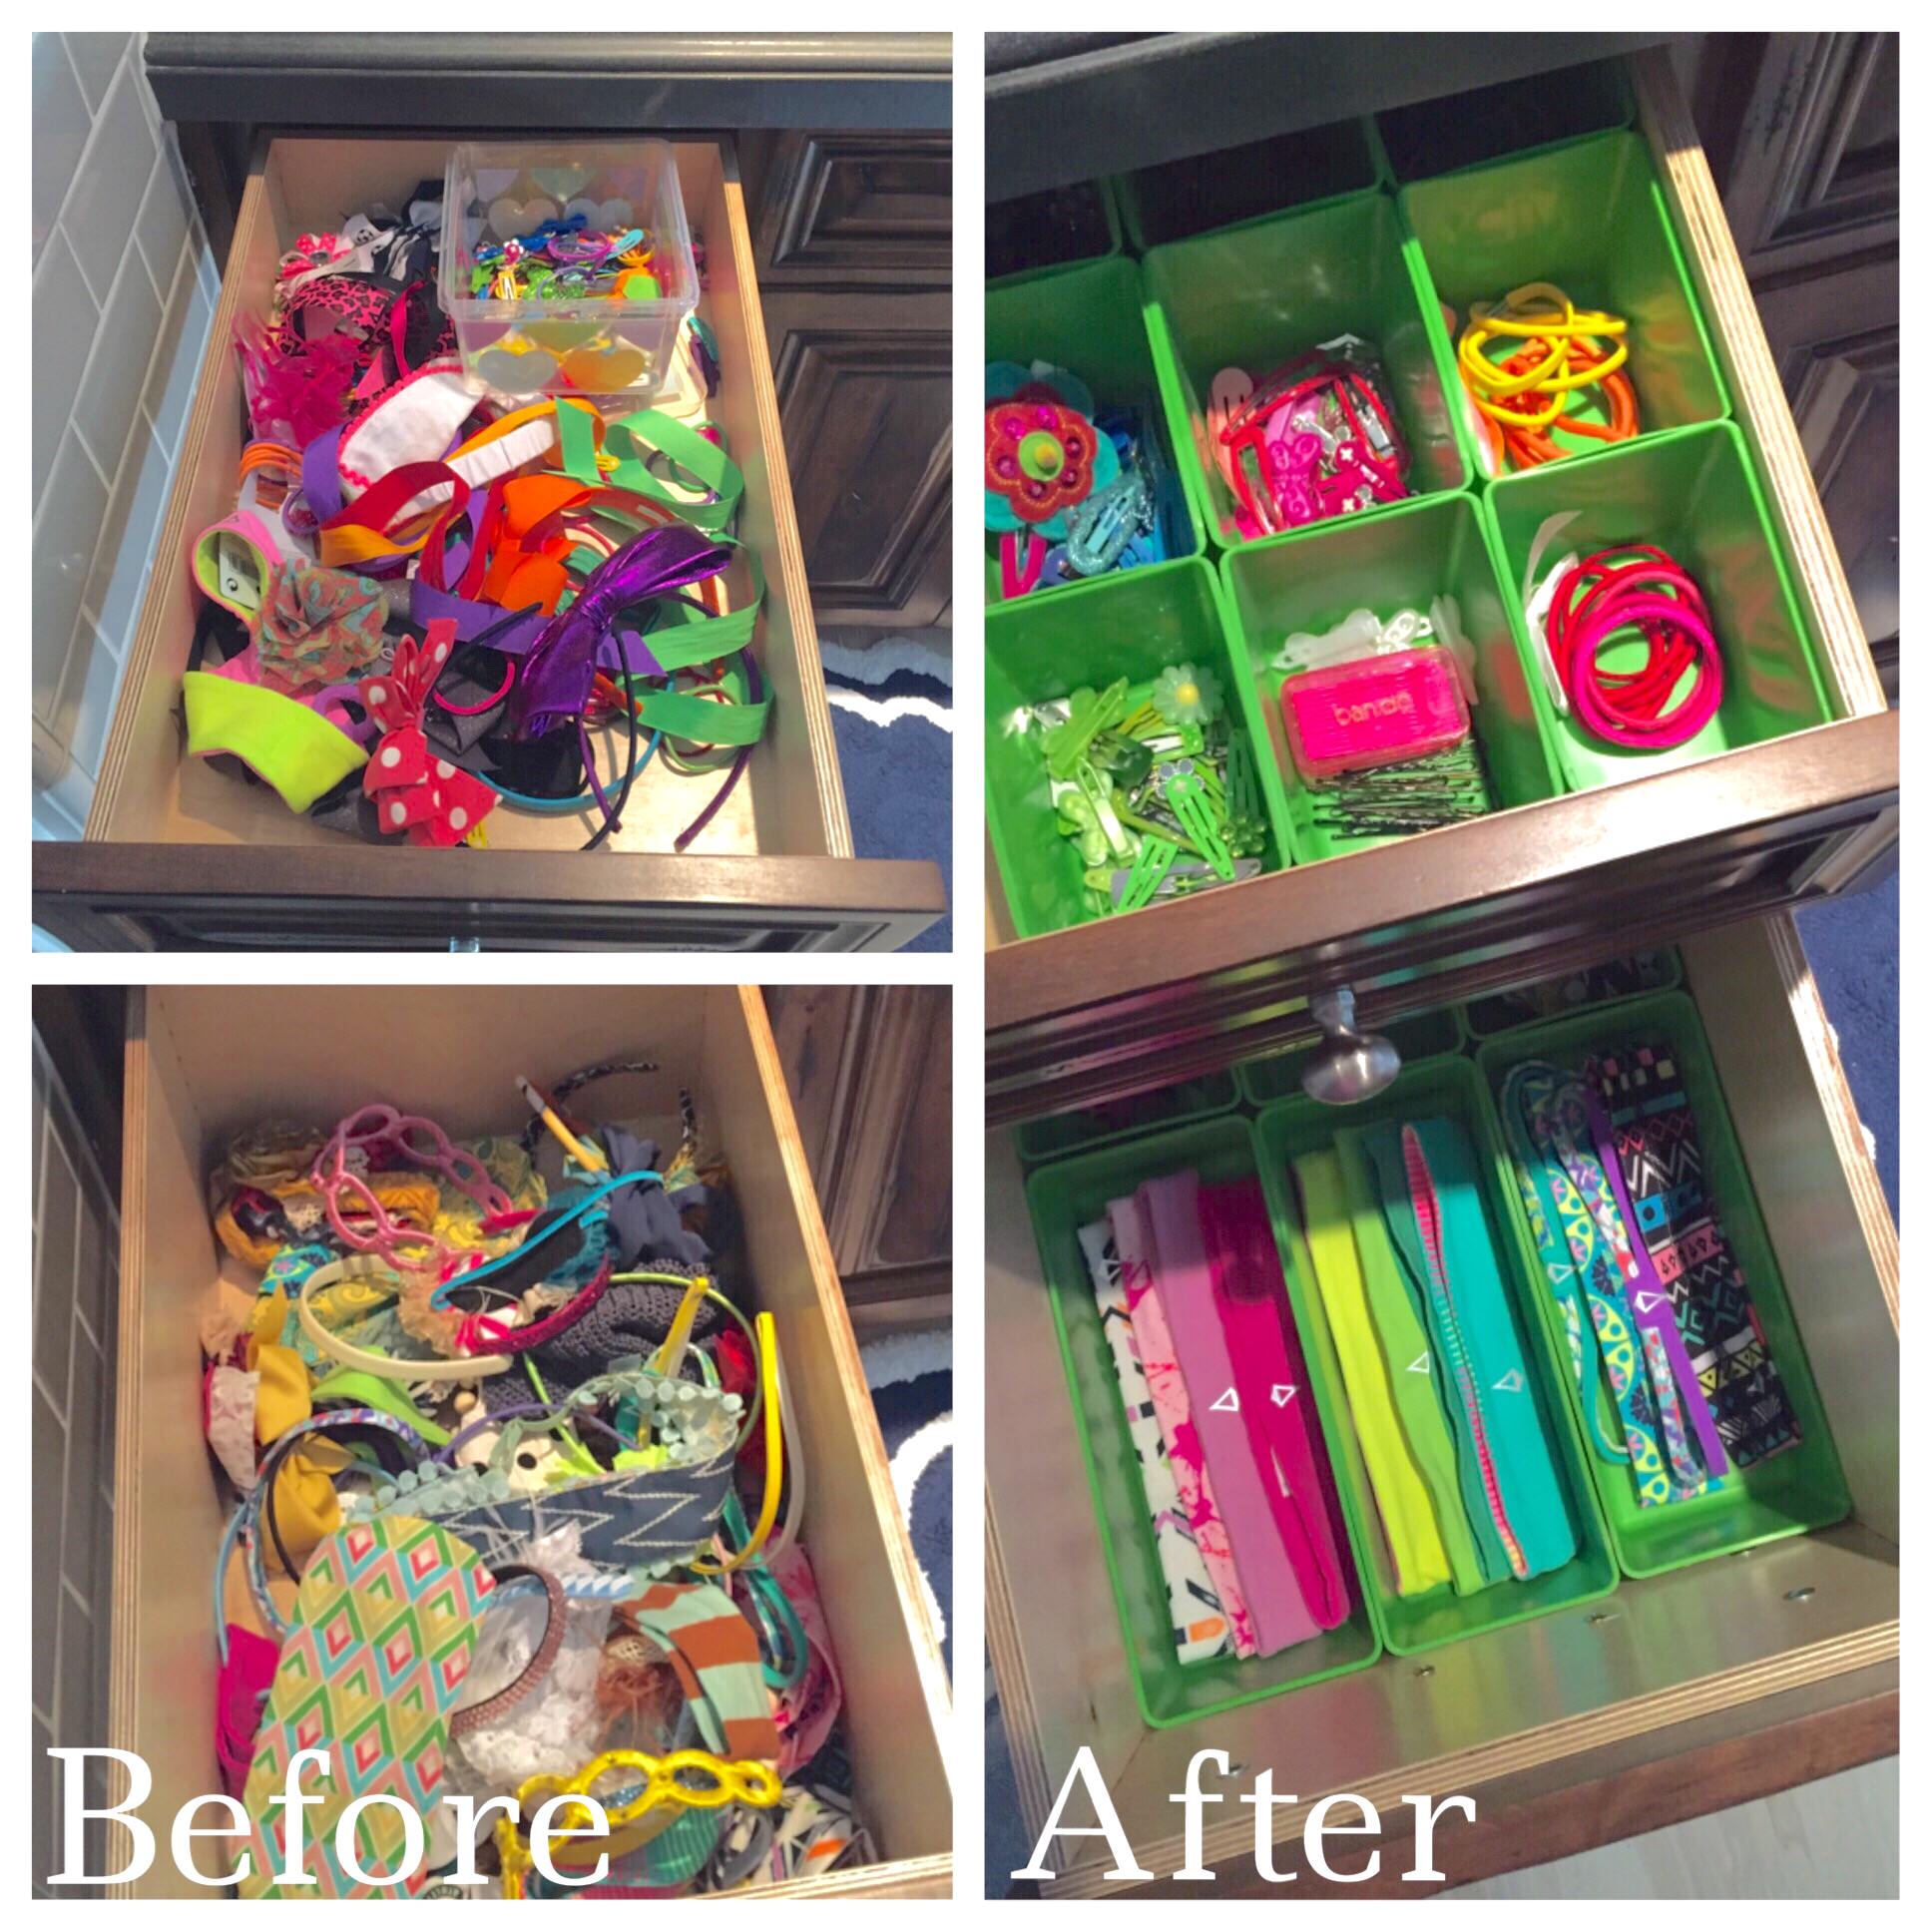 Mika Perry, Scottsdale, Phoenix, bathroom, organized, professional organizer, home organization, before and after, DIY, kids, hair accessories, head bands, bows, hair clips, home organization